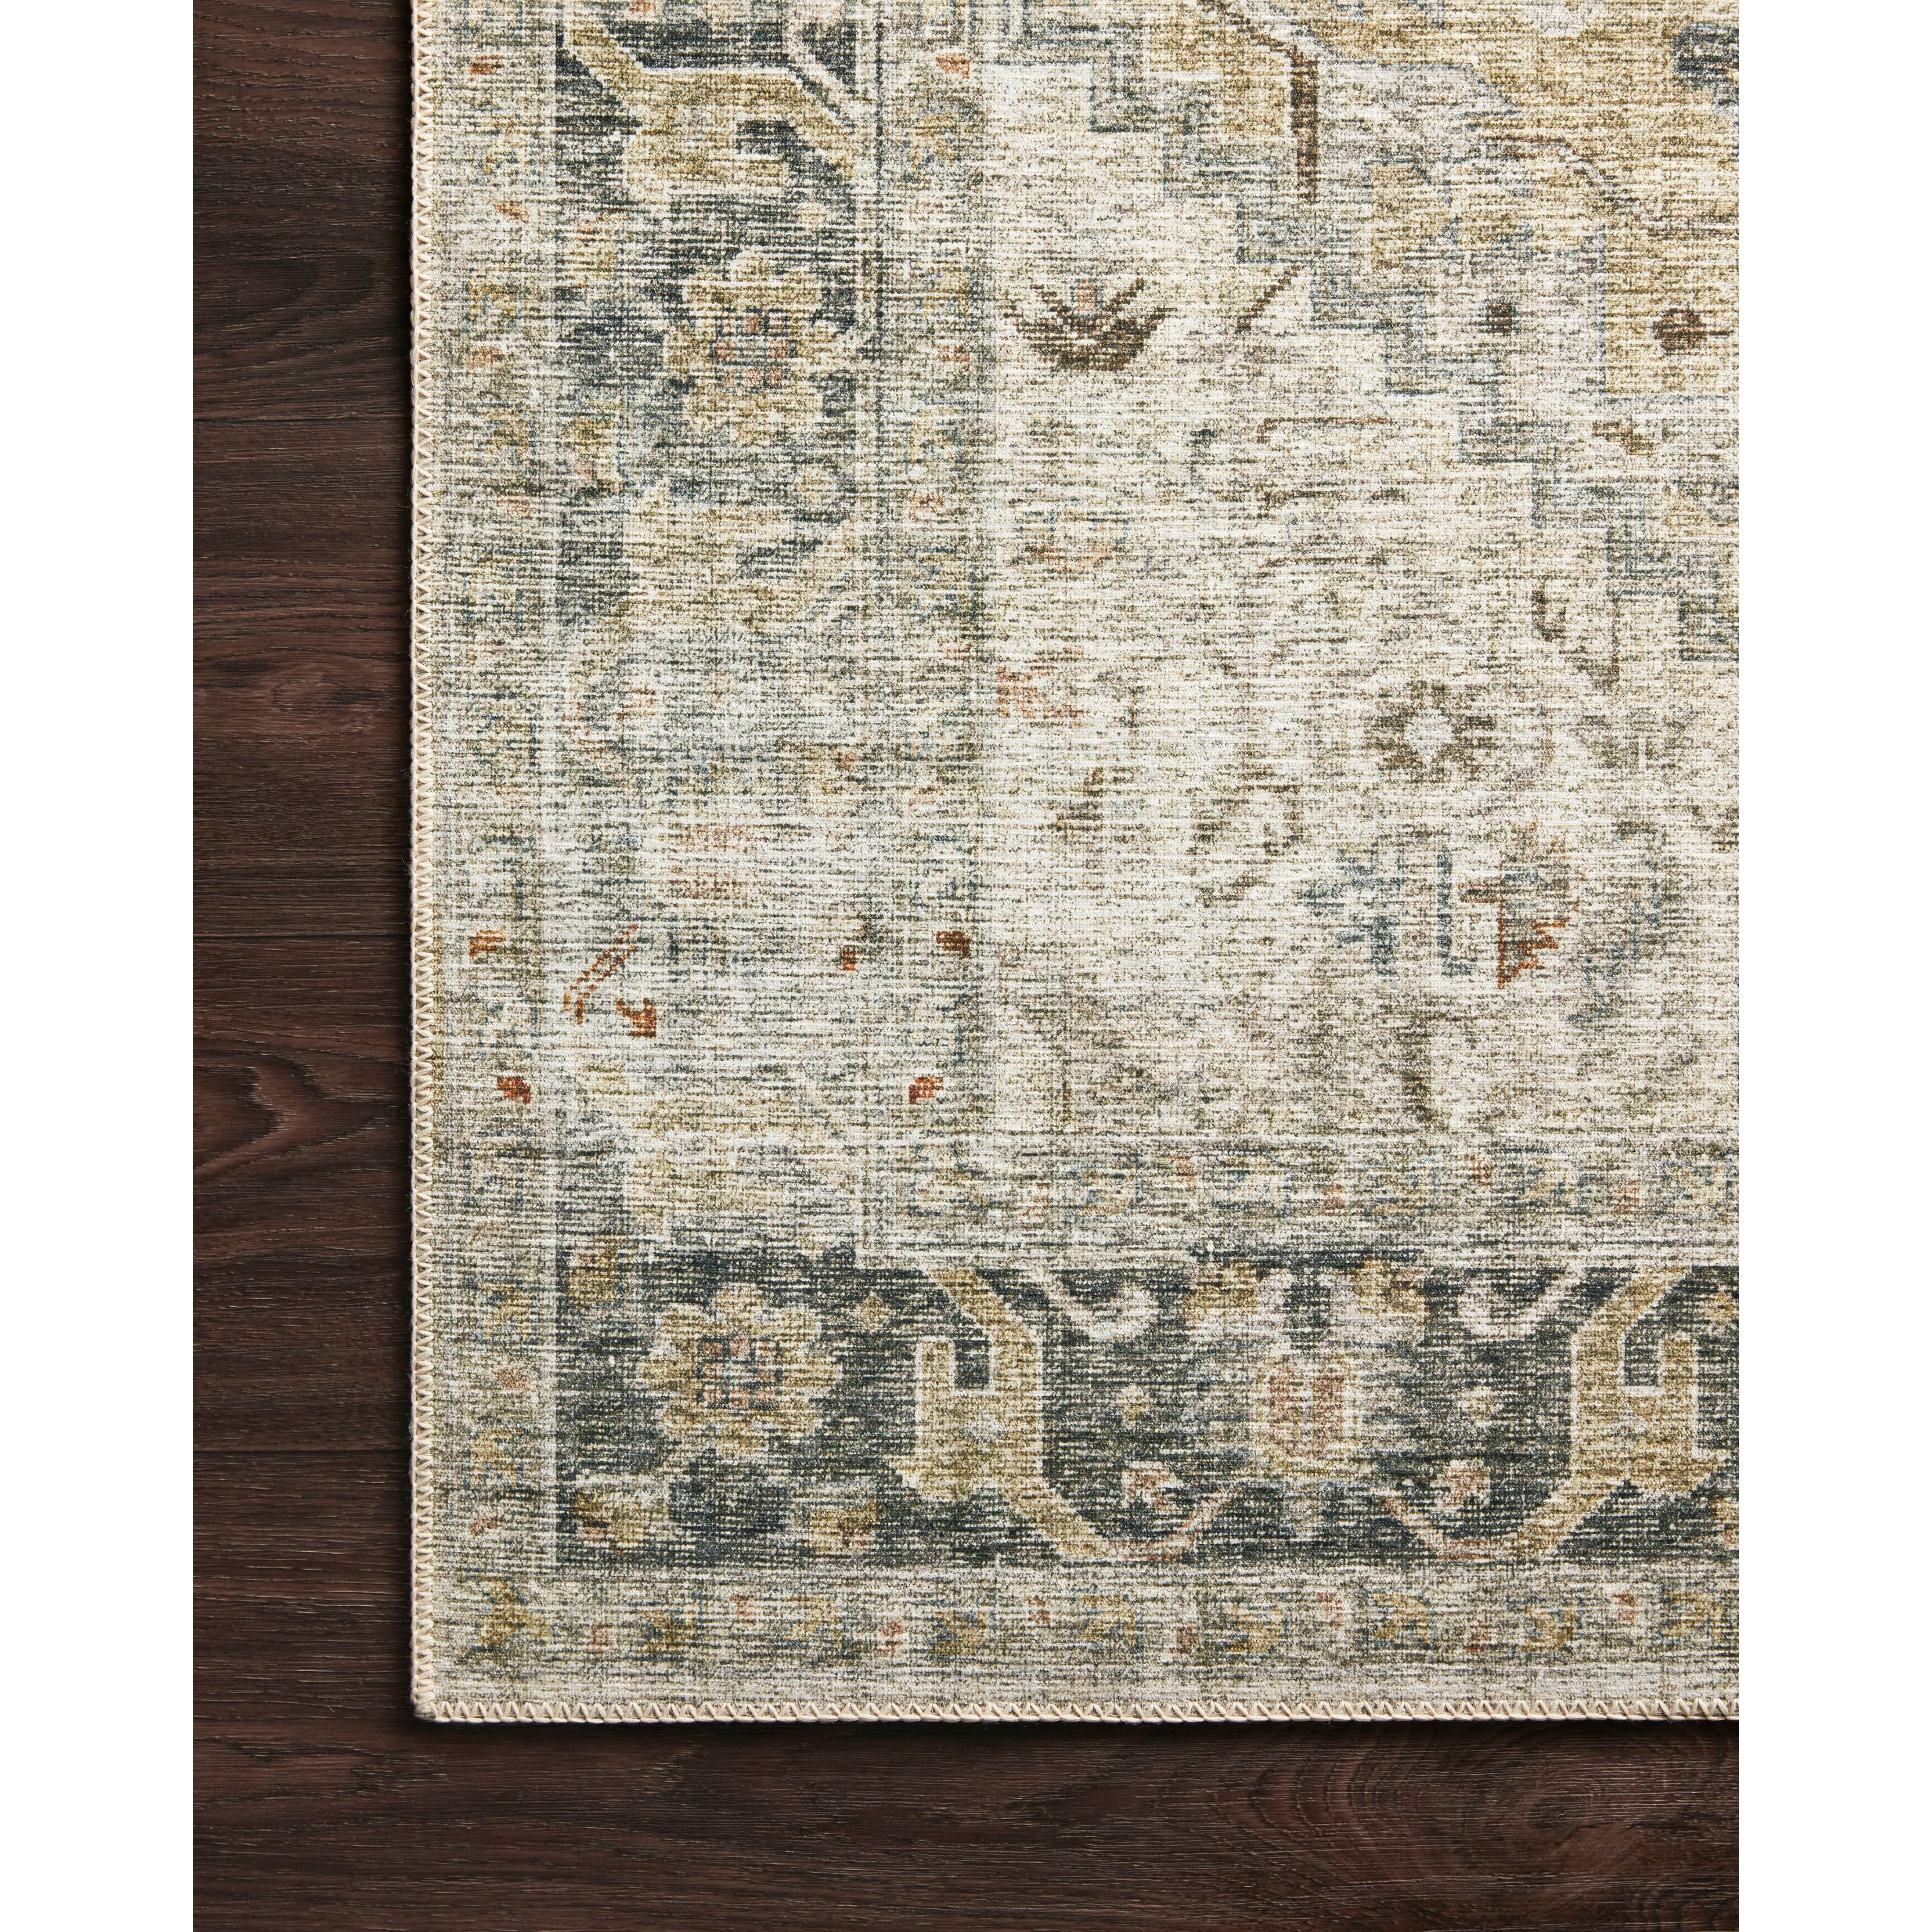 The Skye Natural / Sand rug is timeless and classic with a beautiful, old-world design in a variety of color choices. Power-loomed of 100% polyester, these printed designs provide the textured effect of high-end rugs at an affordable price.